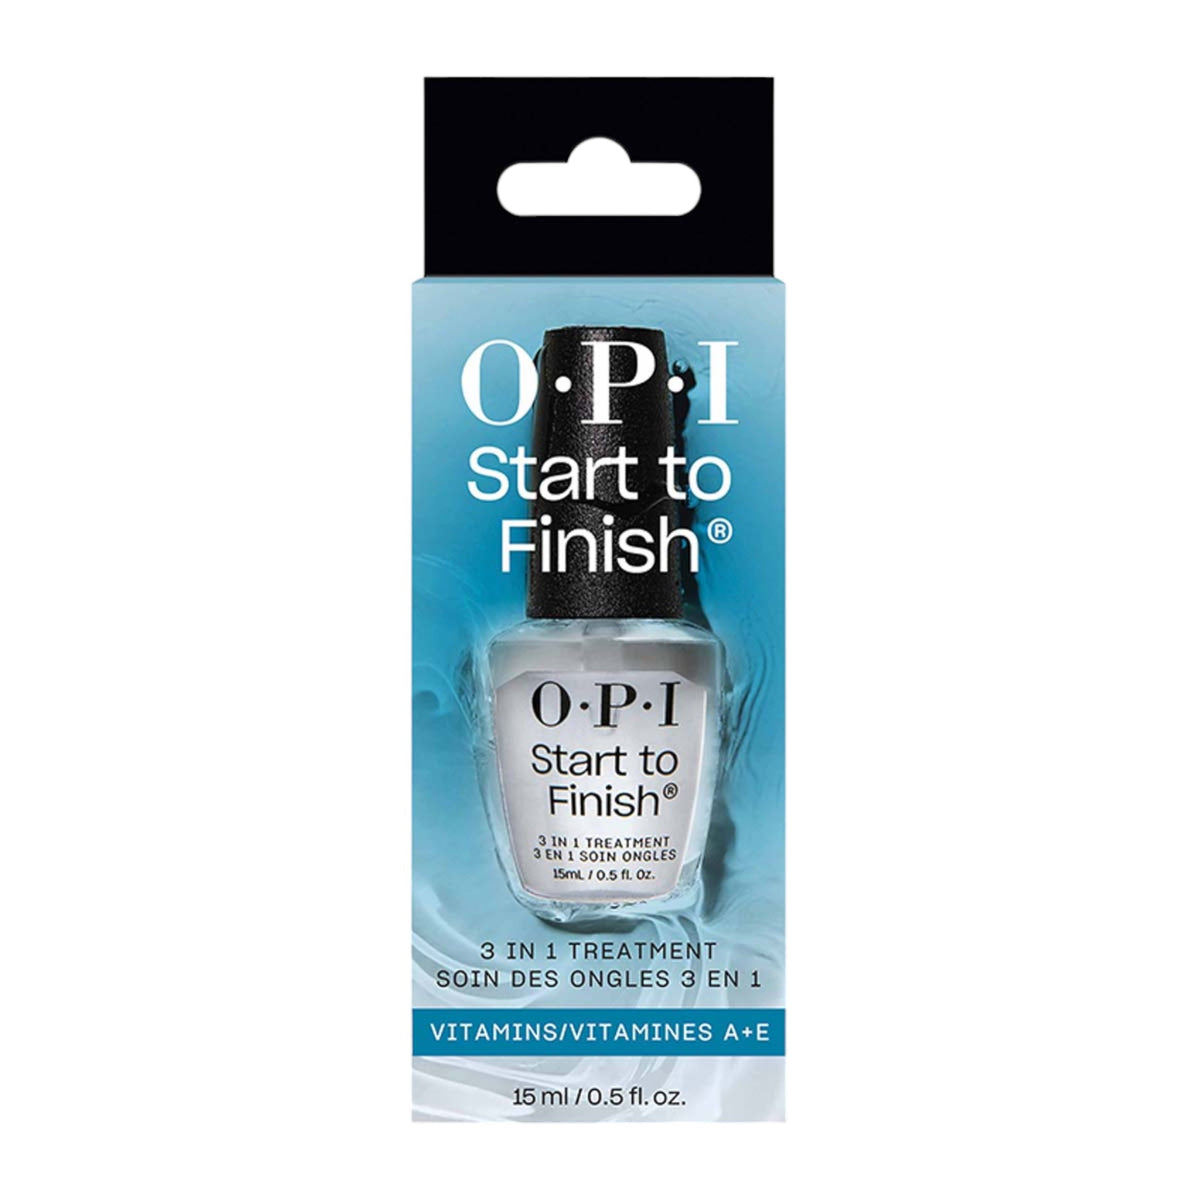 OPI Nail Envy Start To Finish Treatment 3in1 15ml